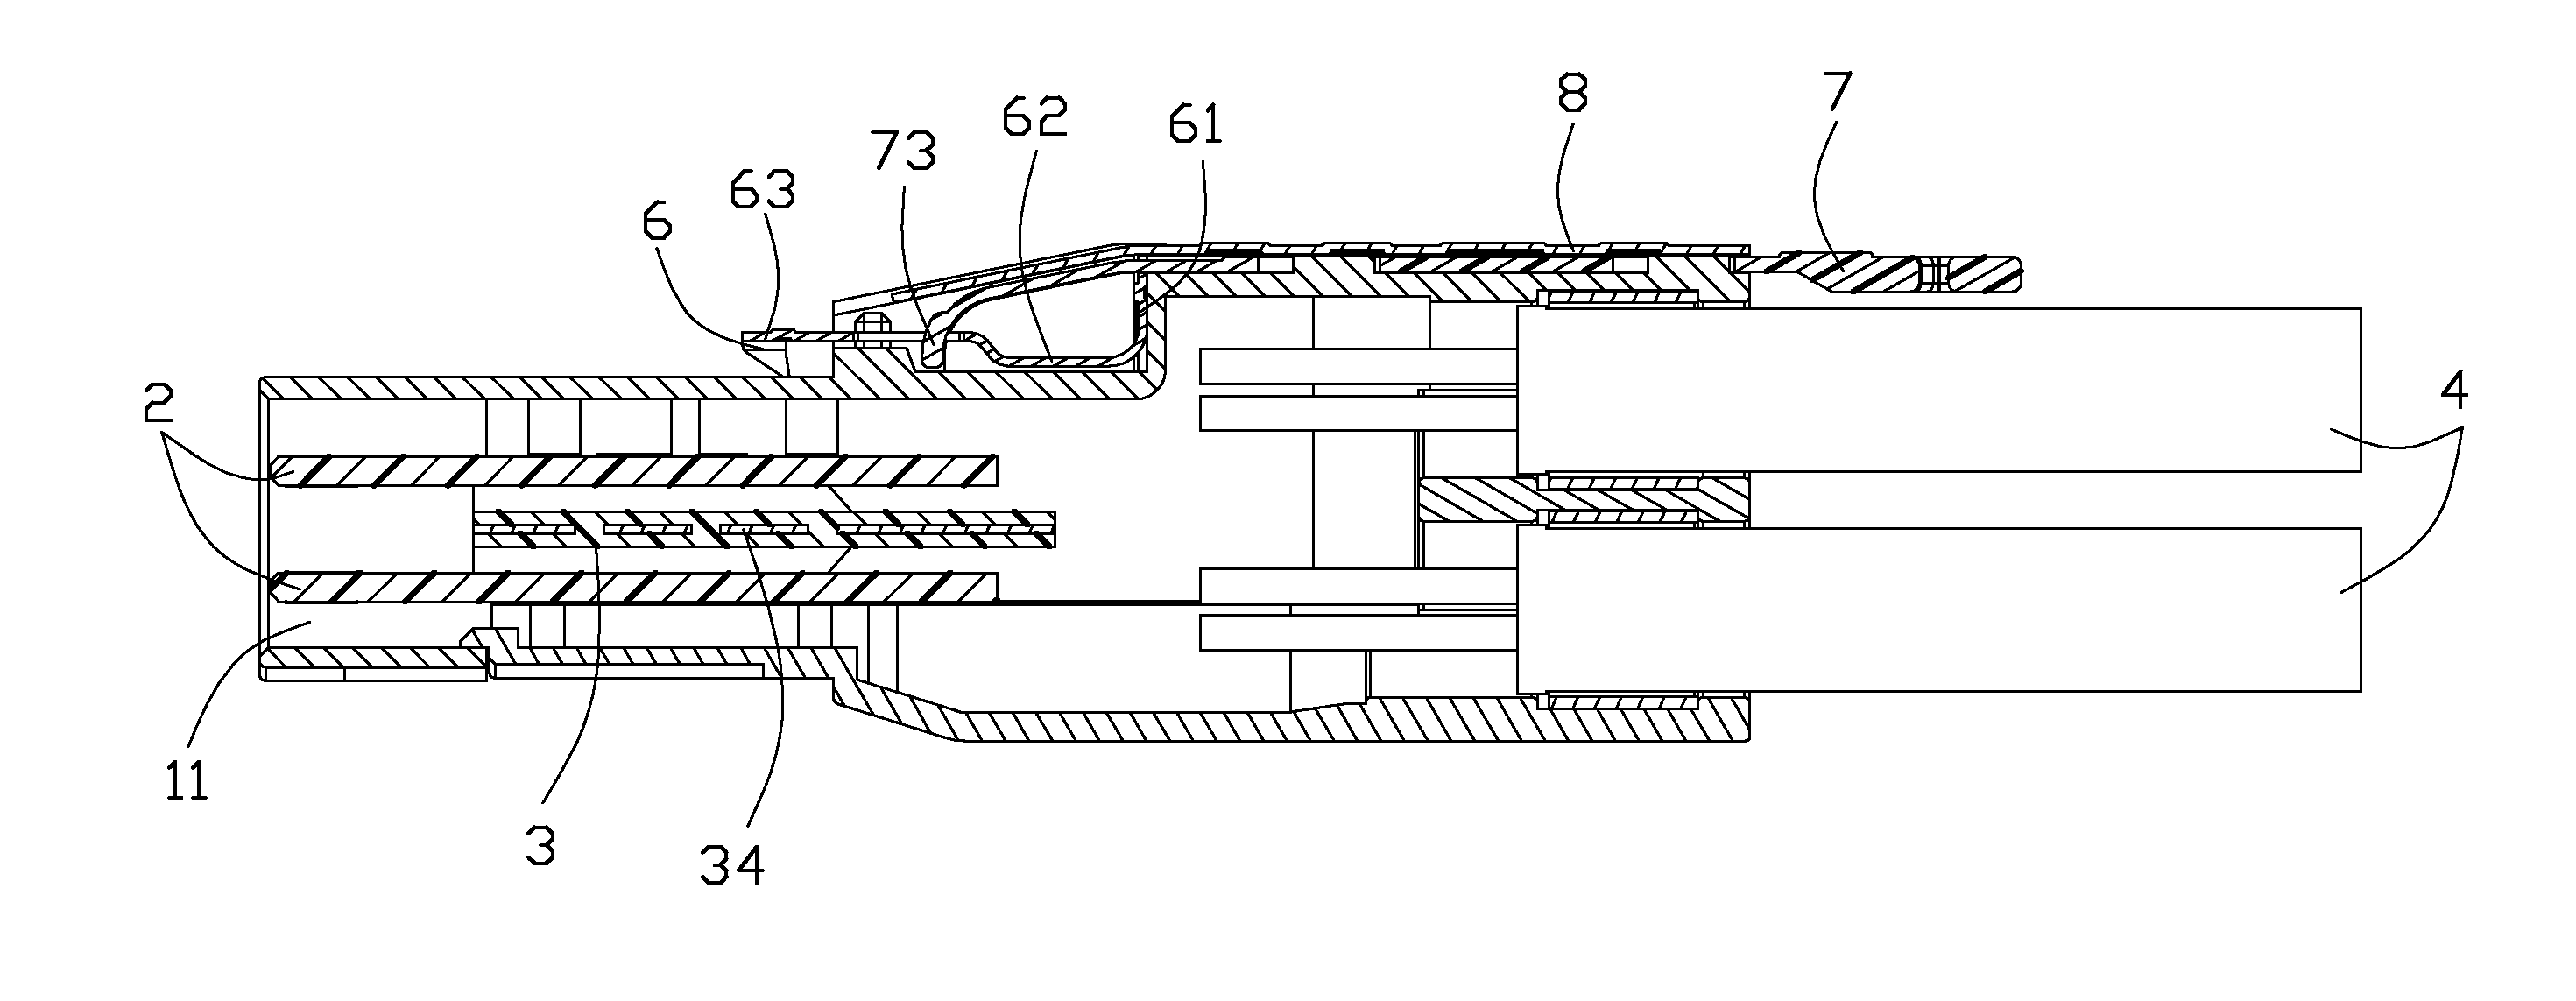 Electrical connector assembly having engaging means for providing holding force